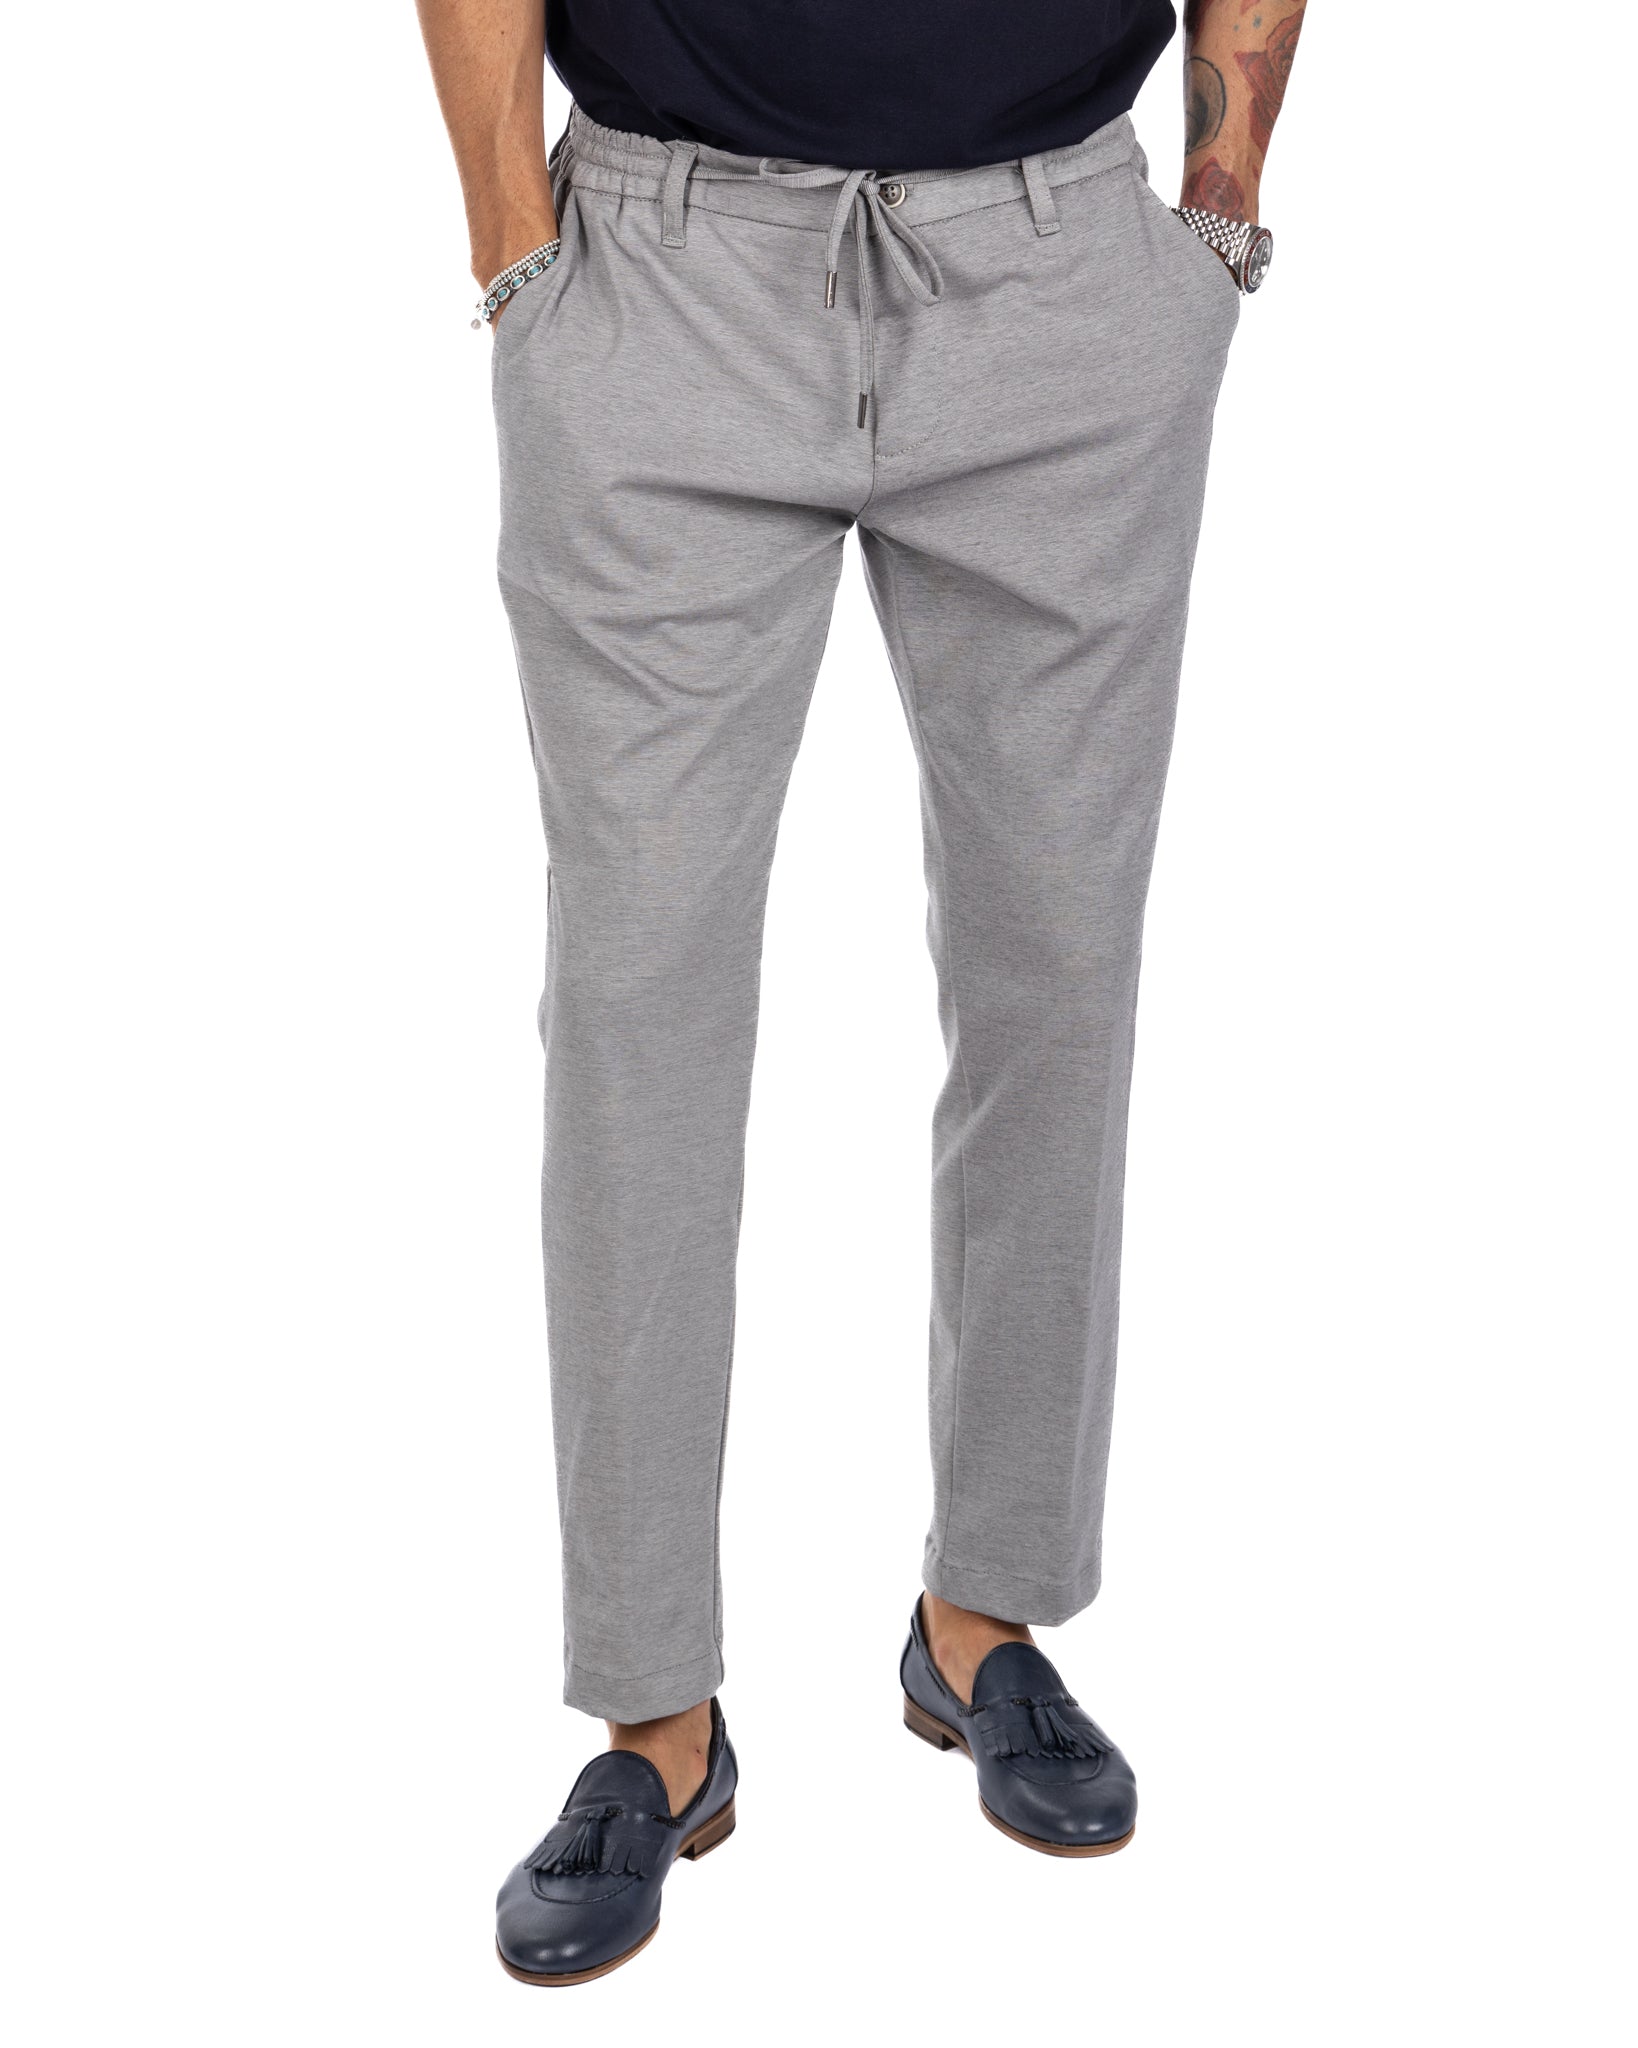 Shelby - gray cotton trousers